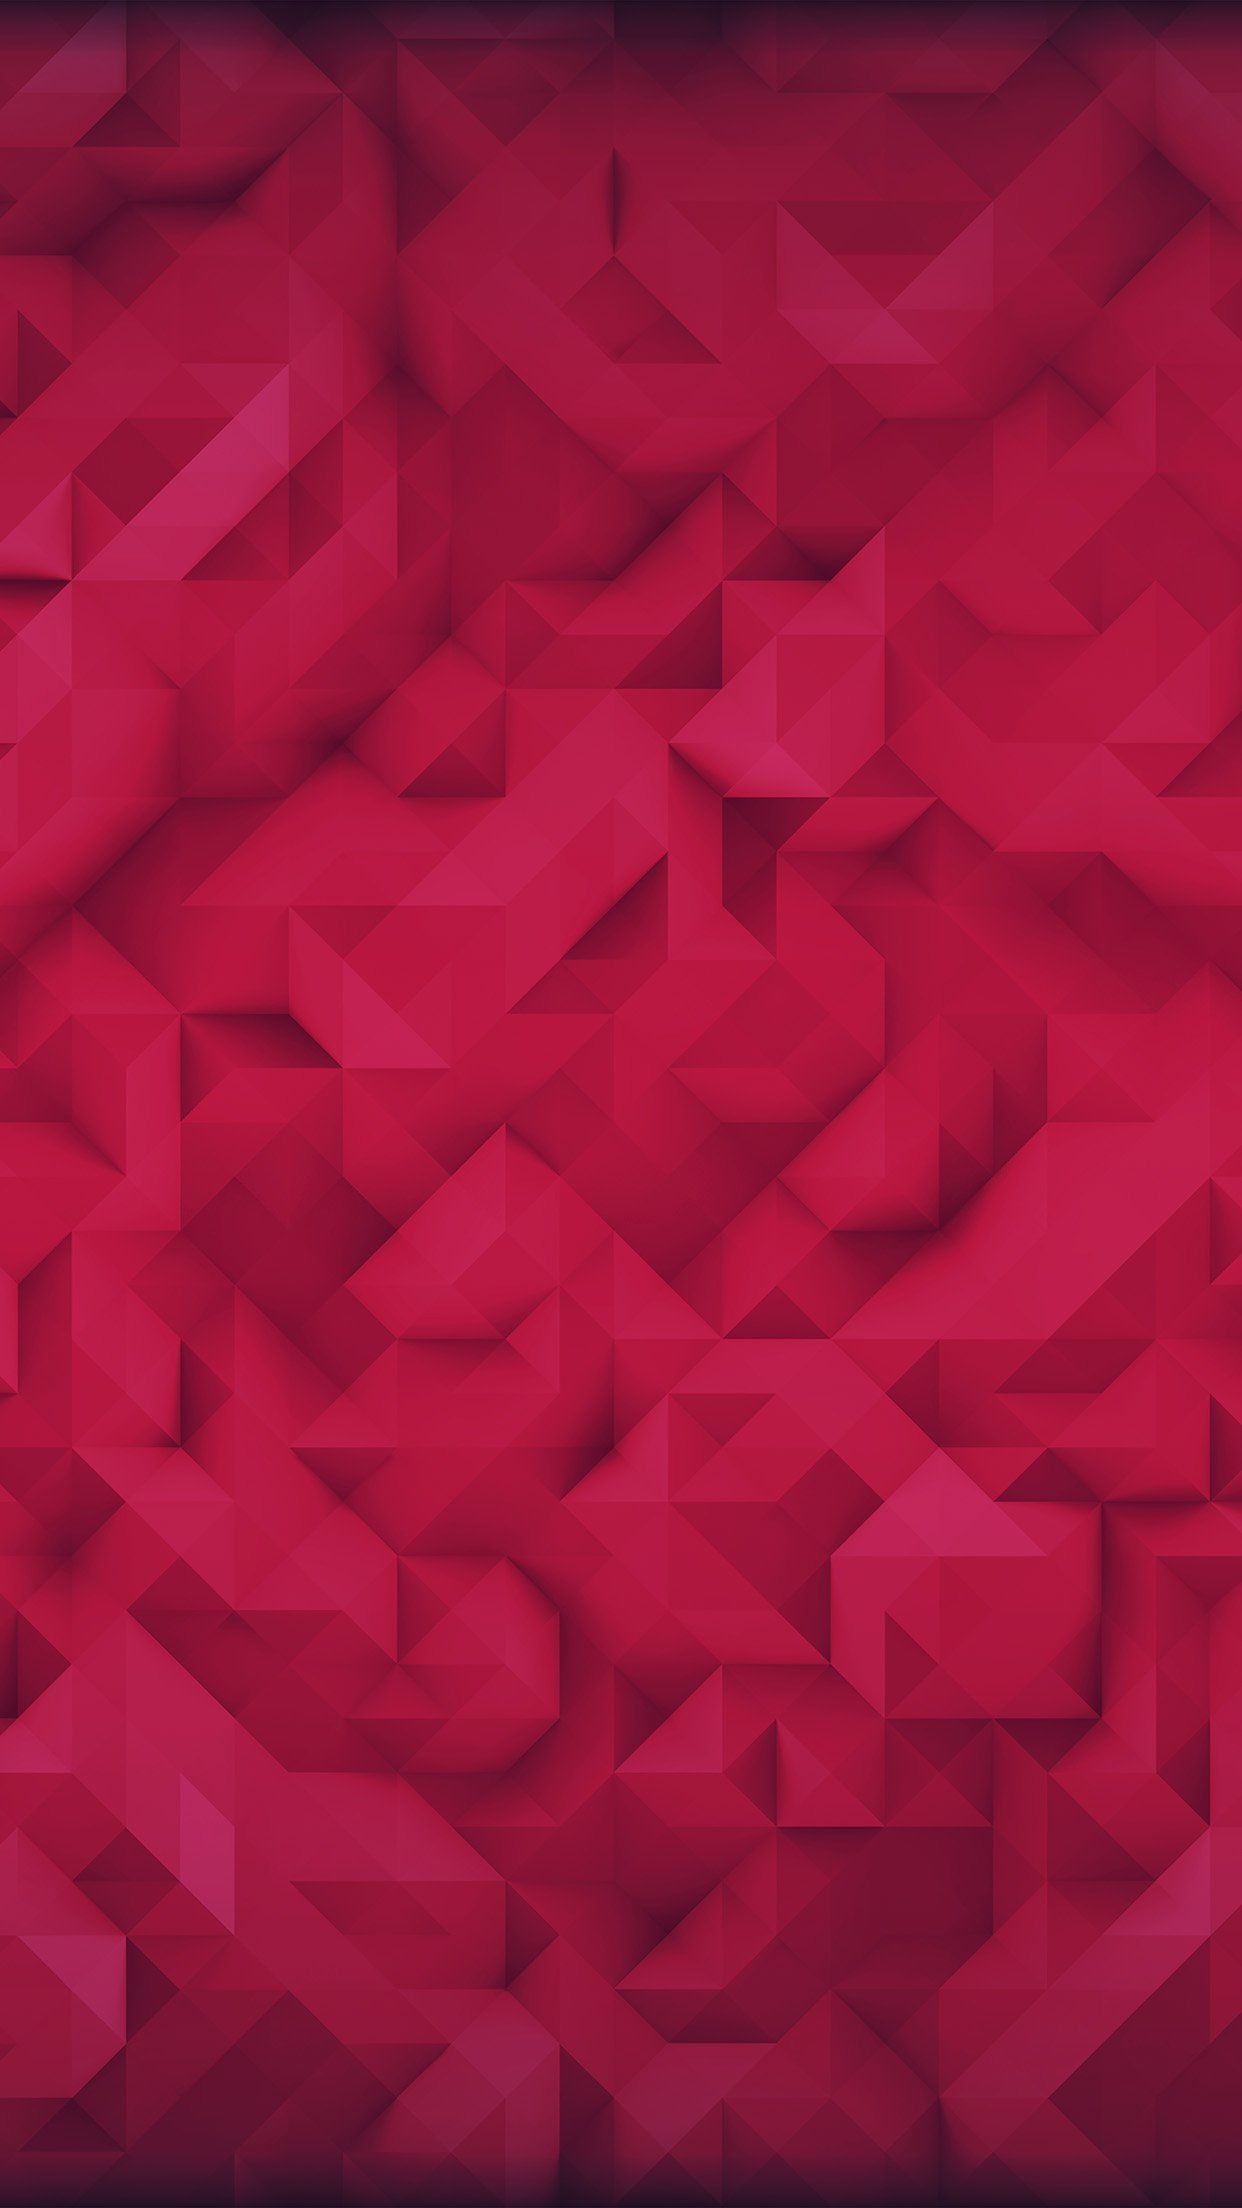 Polygon Art Red Triangle Pattern iPhone 8 Wallpaper Free Download